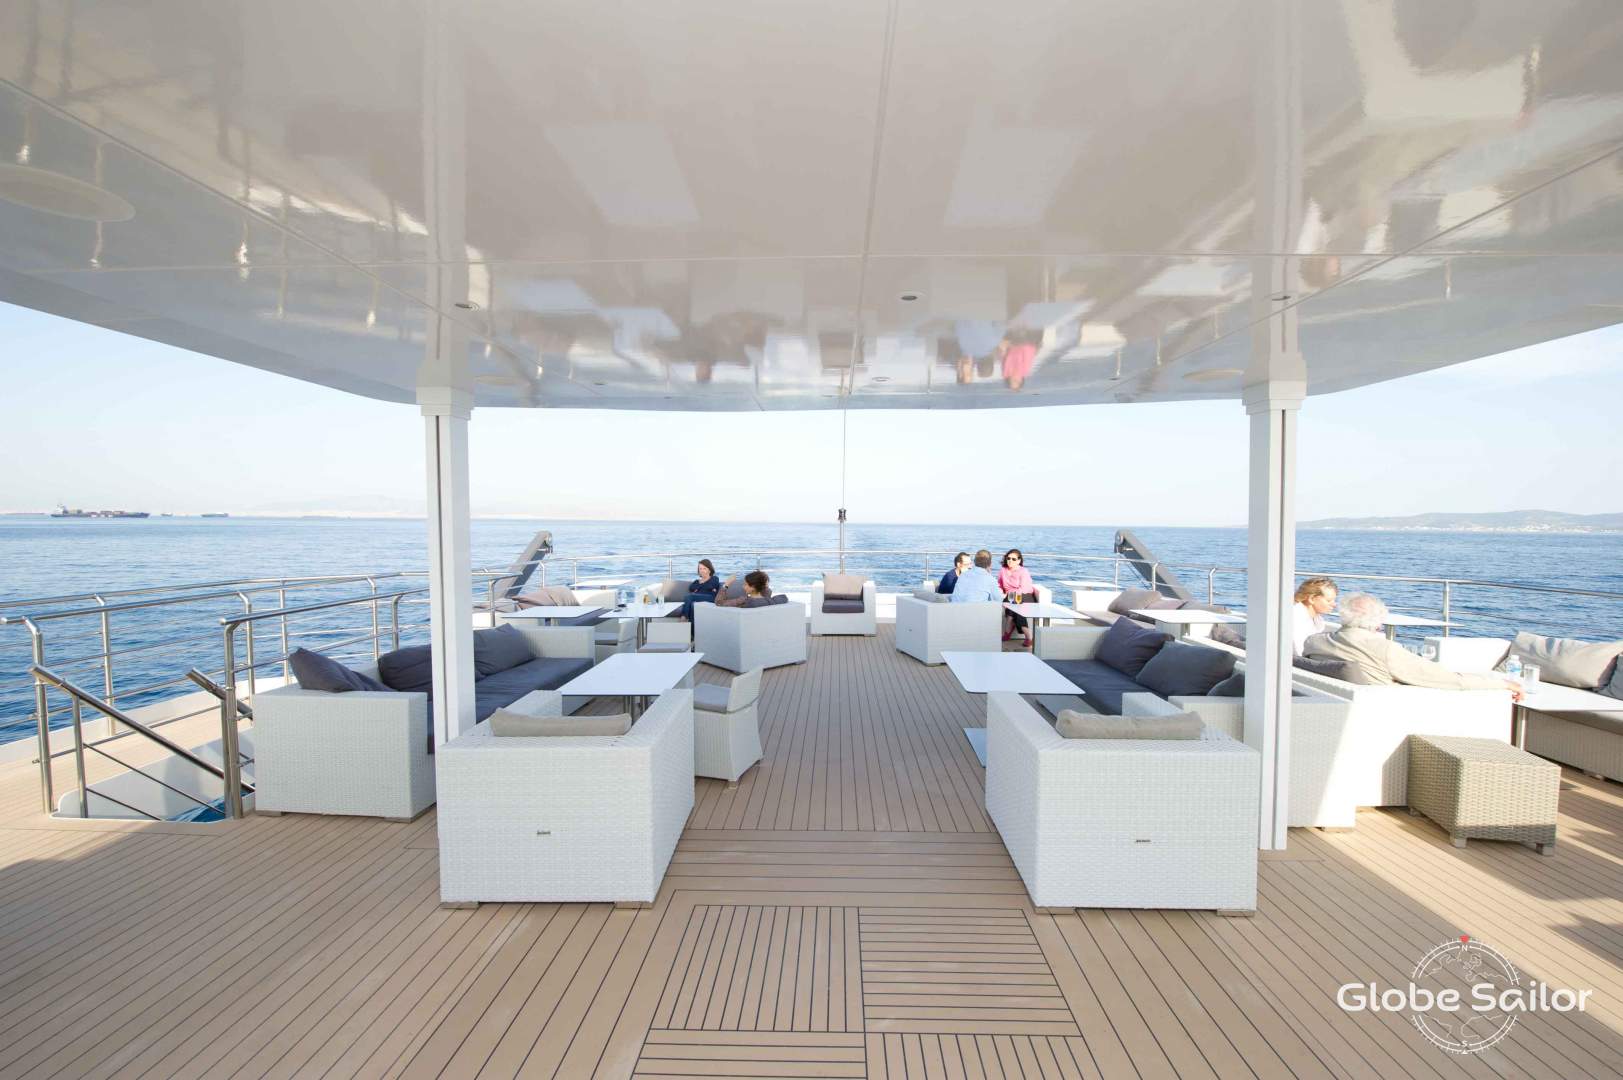 An ideal cruise to relax in complete serenity